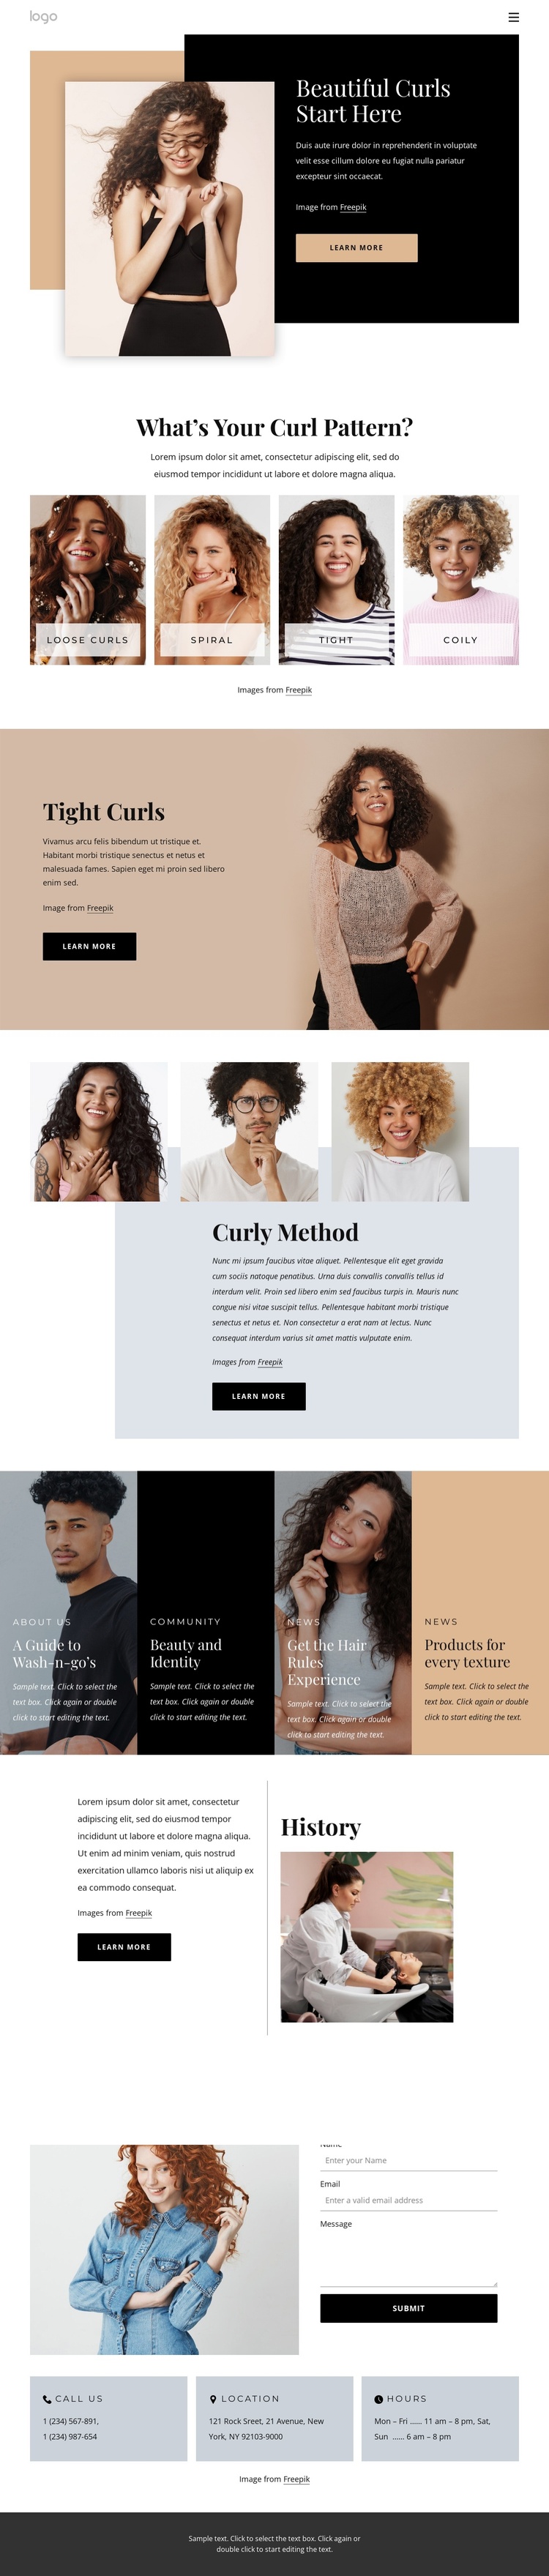 Bring out the best in your curls Joomla Template